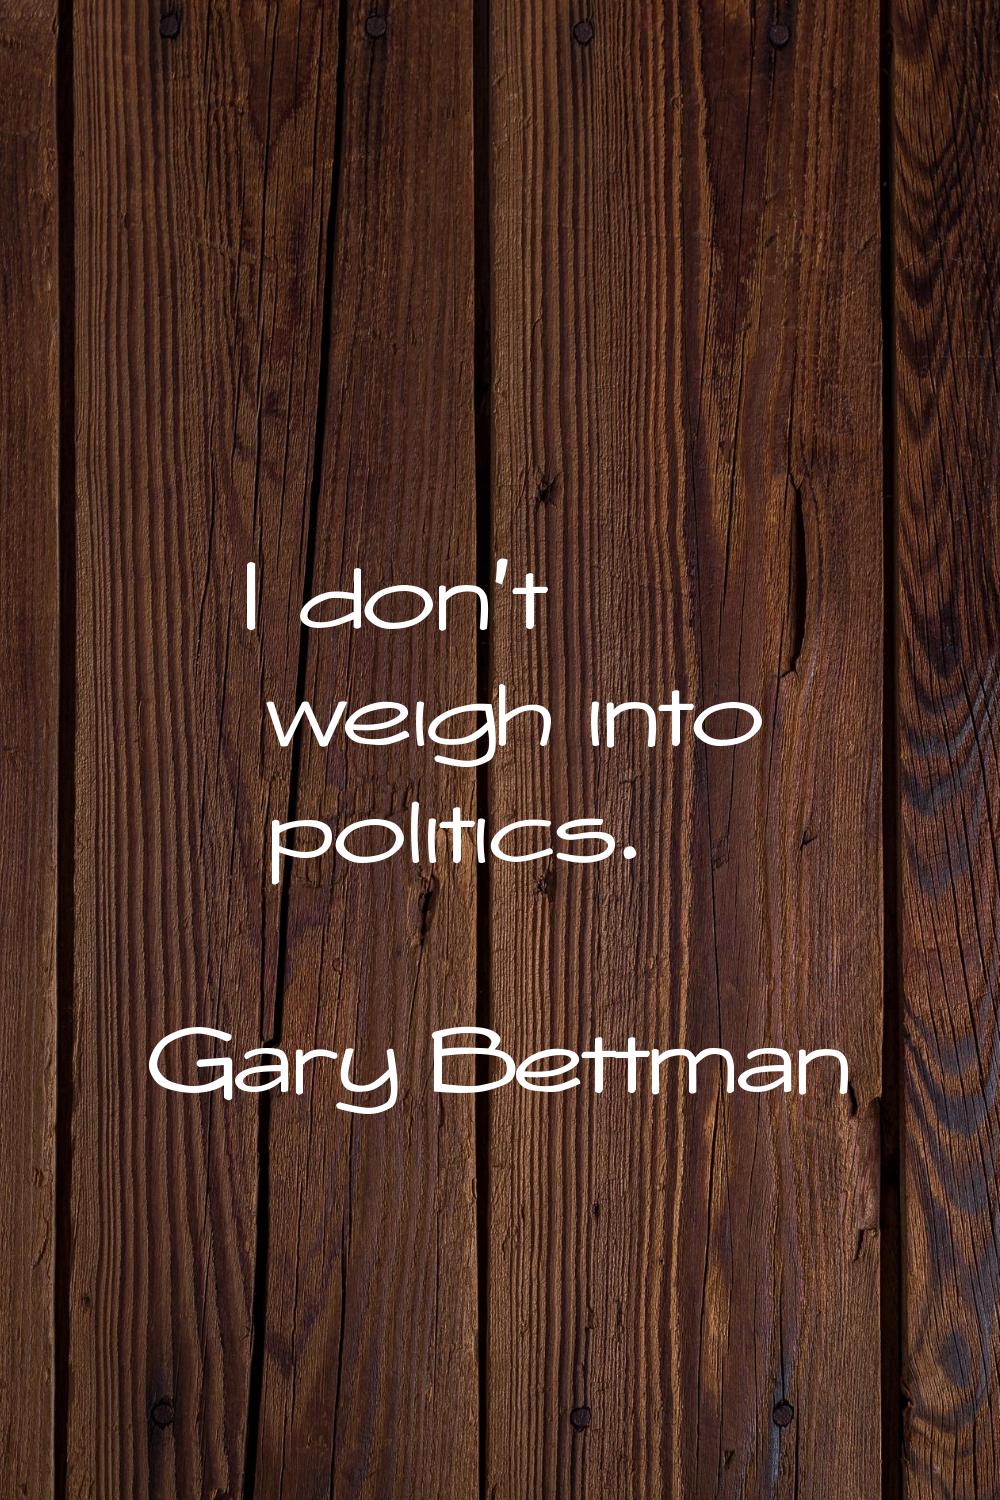 I don't weigh into politics.